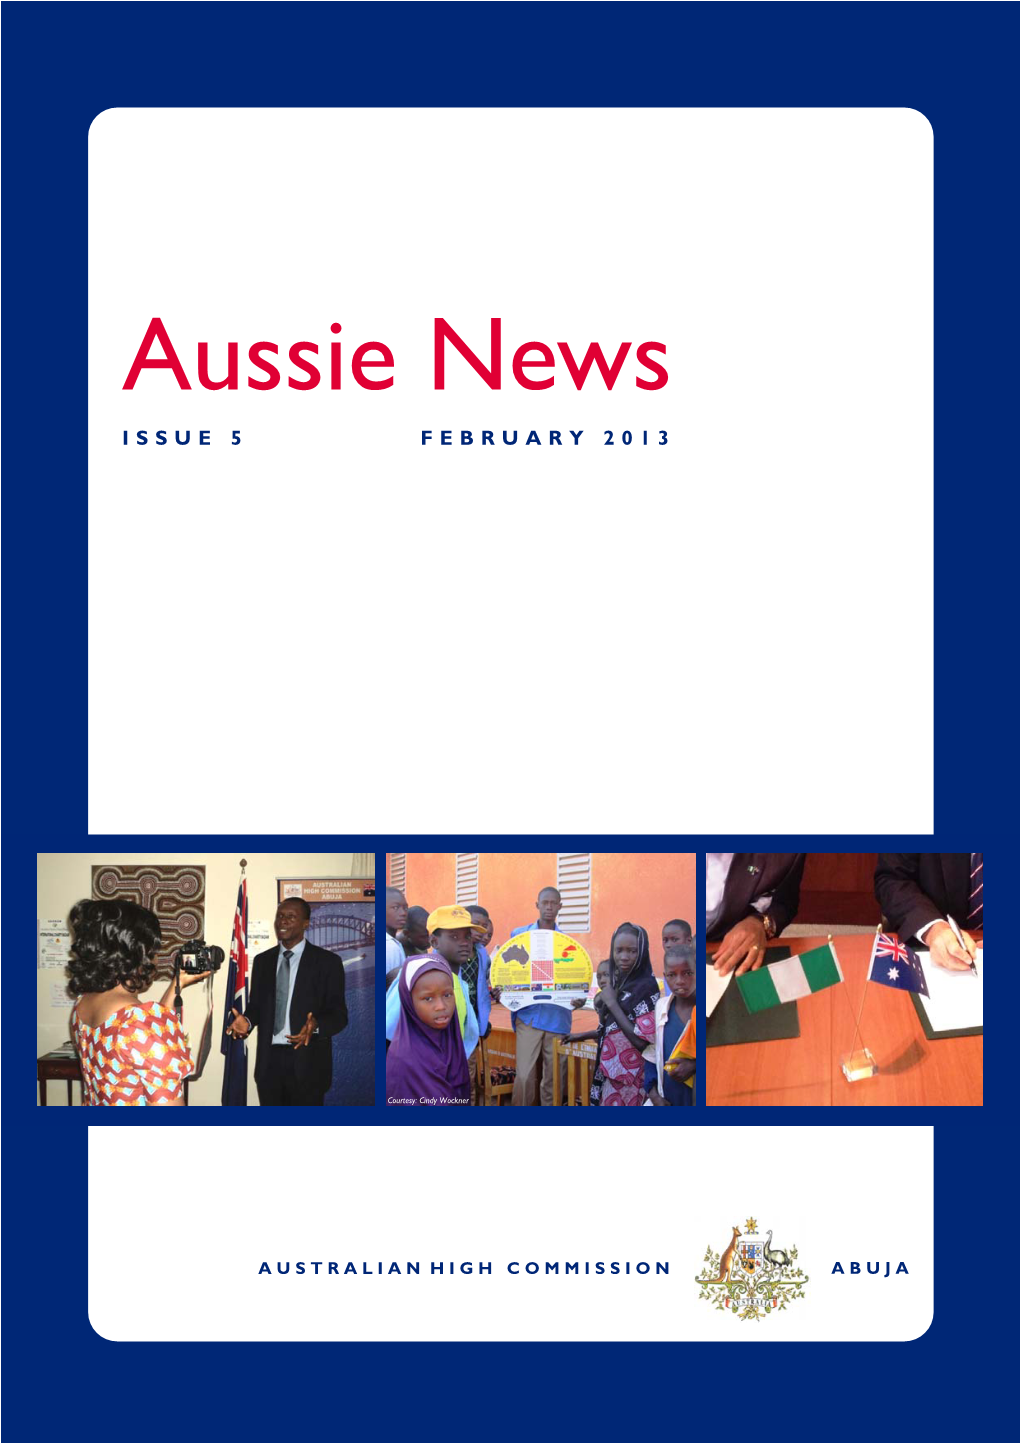 Aussie News Issue 5 February 2013 FINAL Small